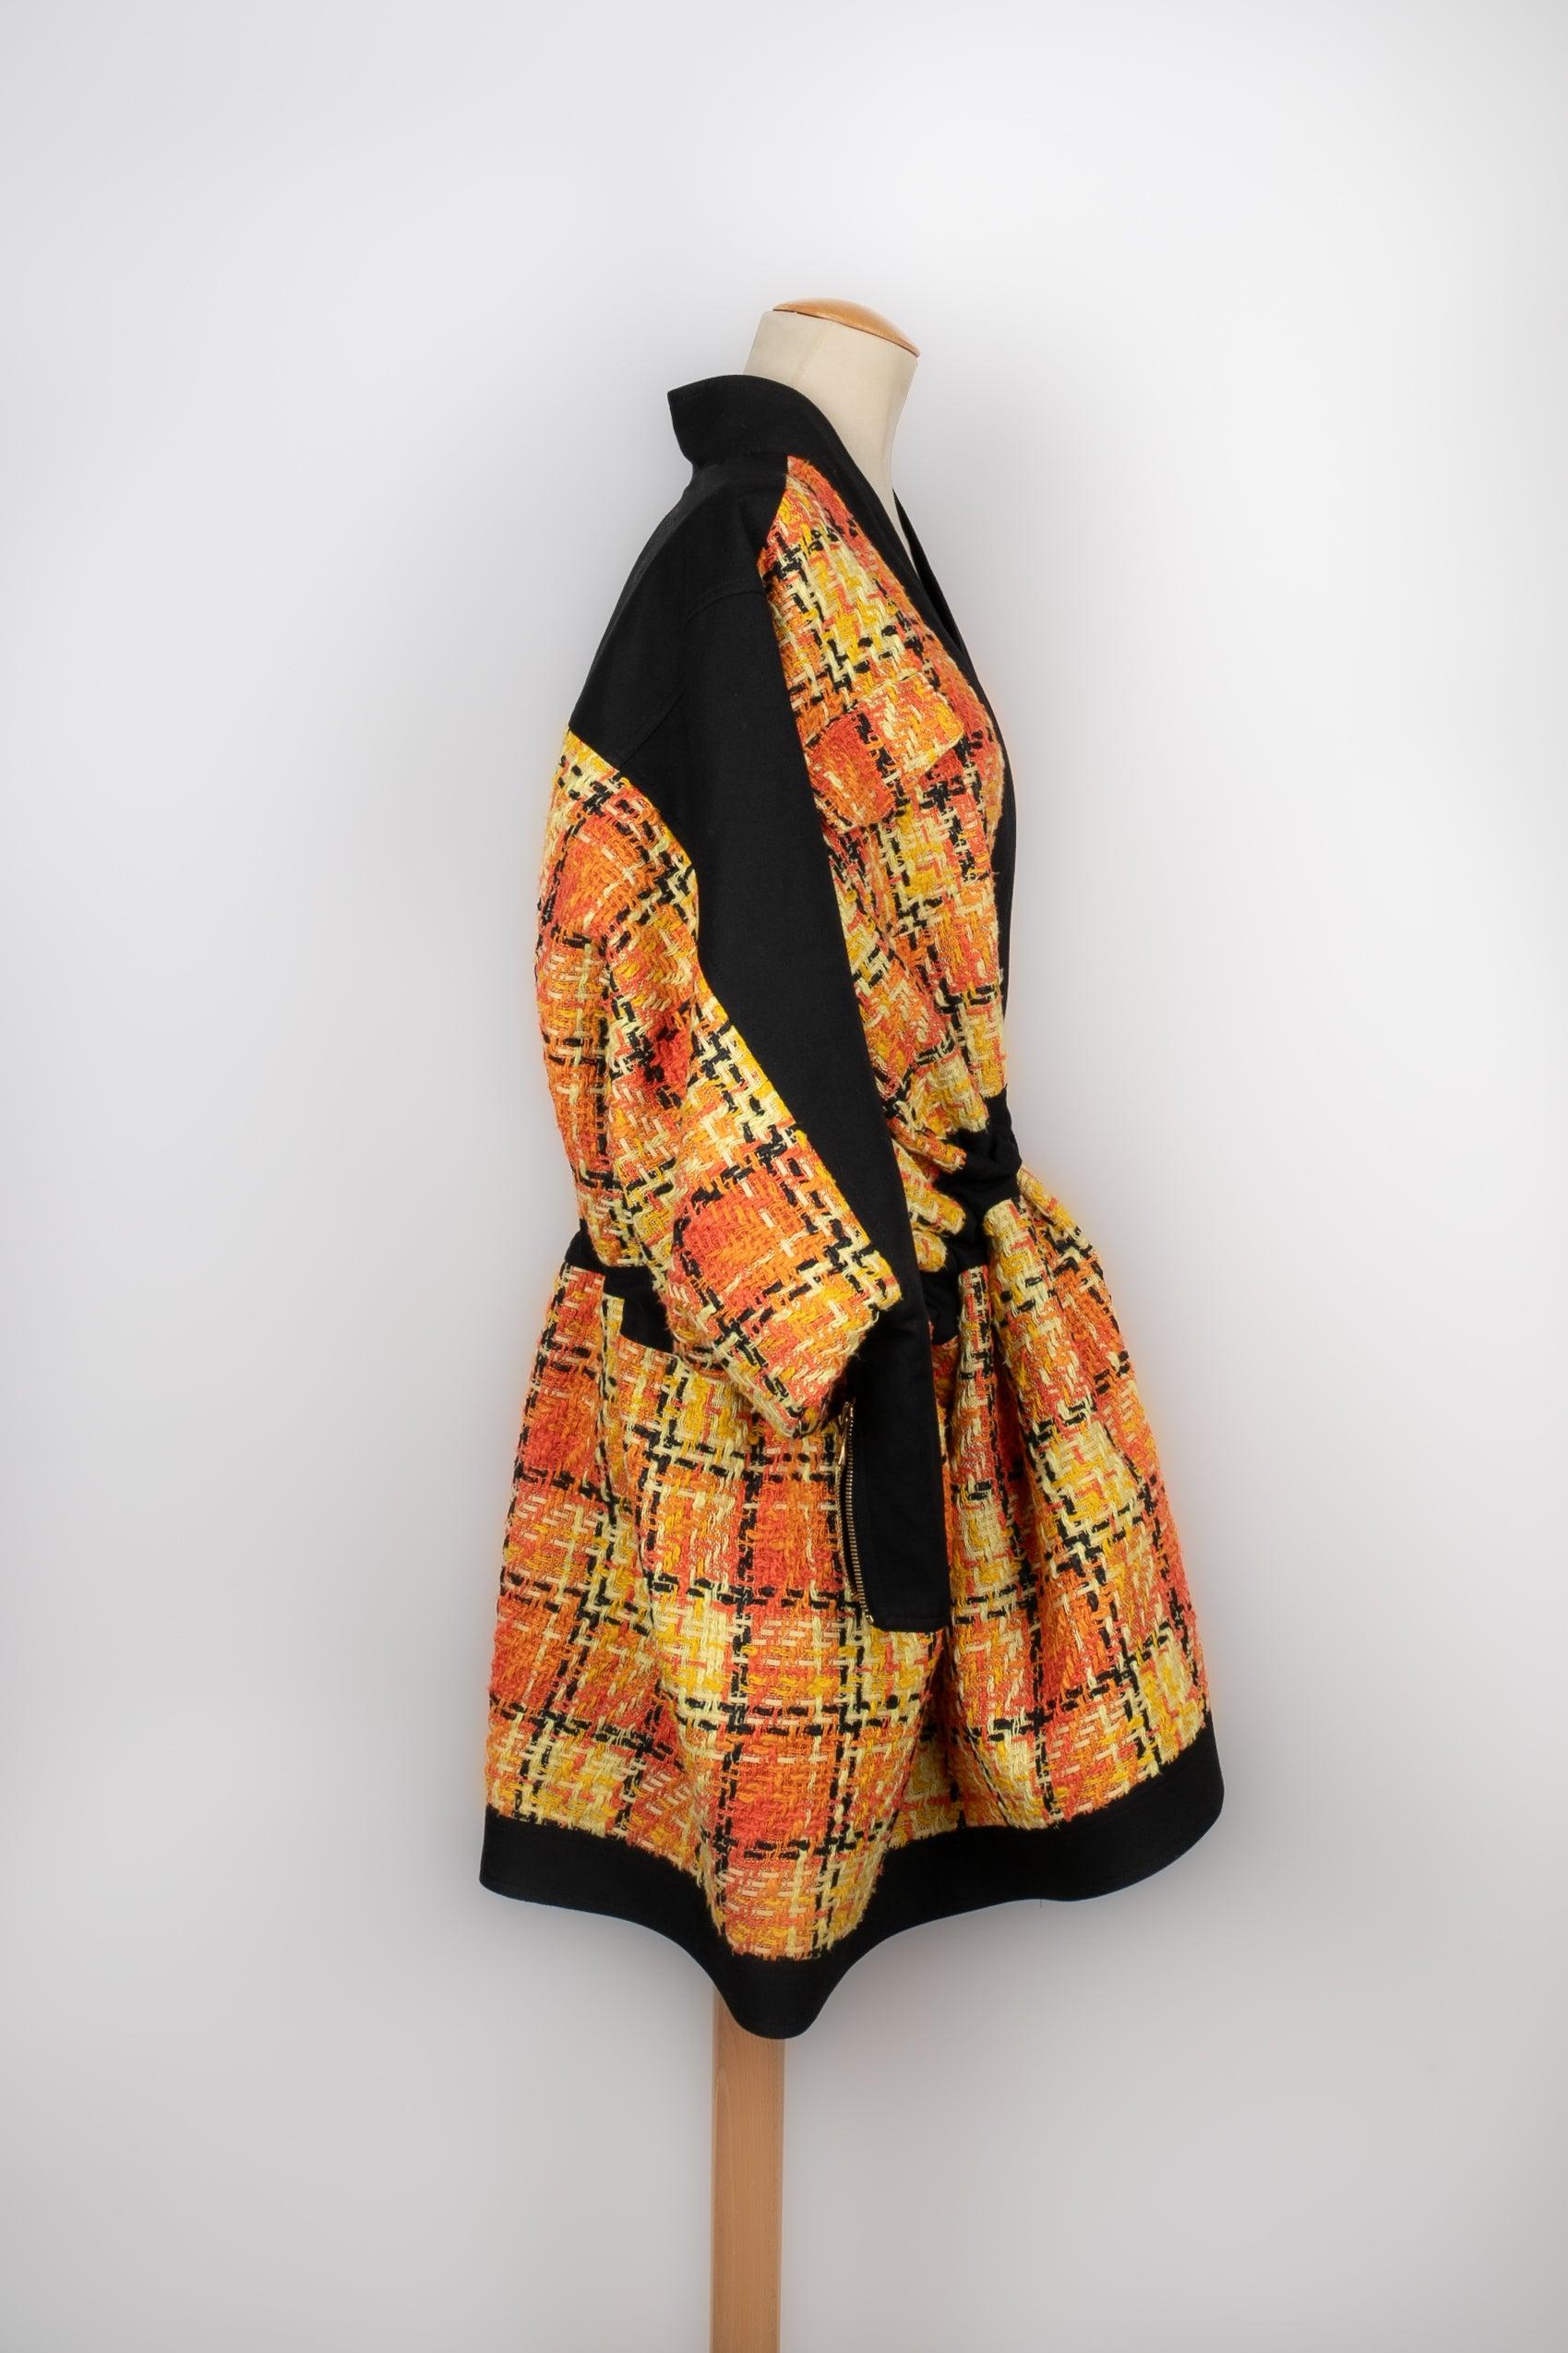 Balmain - Tweed coat in orange and yellow tones. No size indicated, it fits a 36FR/38FR.

Additional information:
Condition: Very good condition
Dimensions: Shoulder width: 44 cm - Sleeve length: 57 cm - Length: 82 cm

Seller Reference: M85